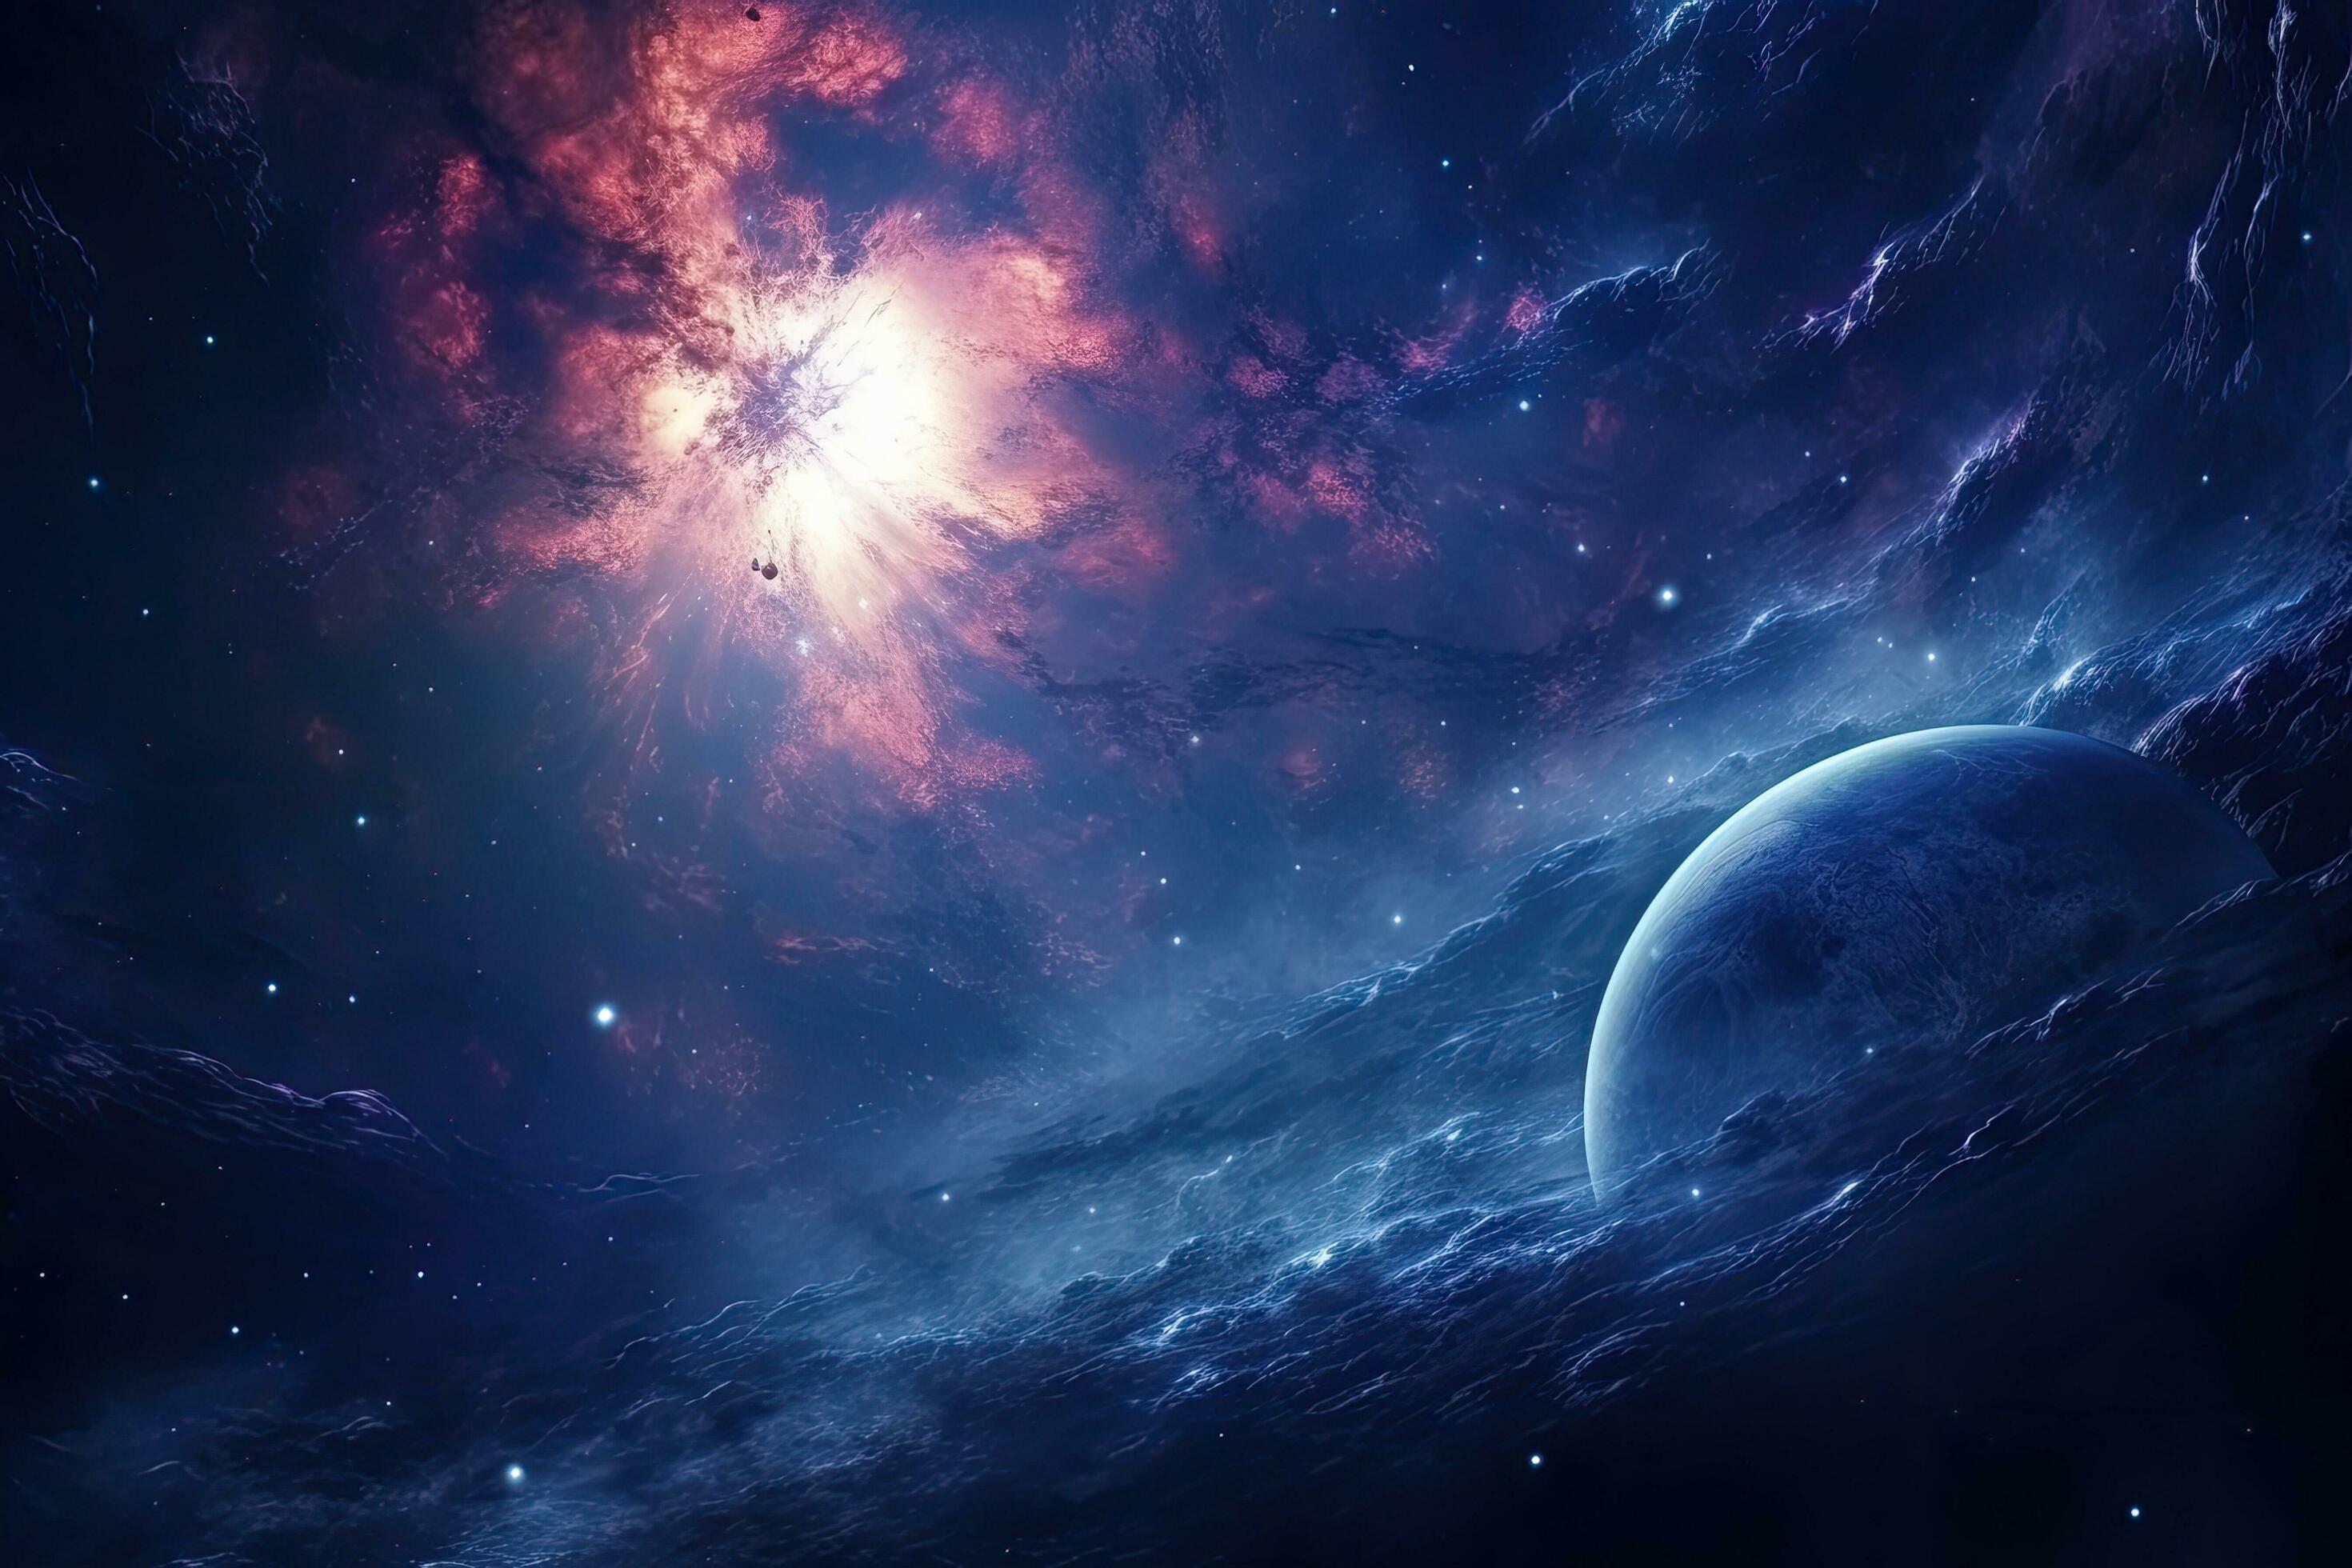 Deep space background with planets and stars. Elements of this